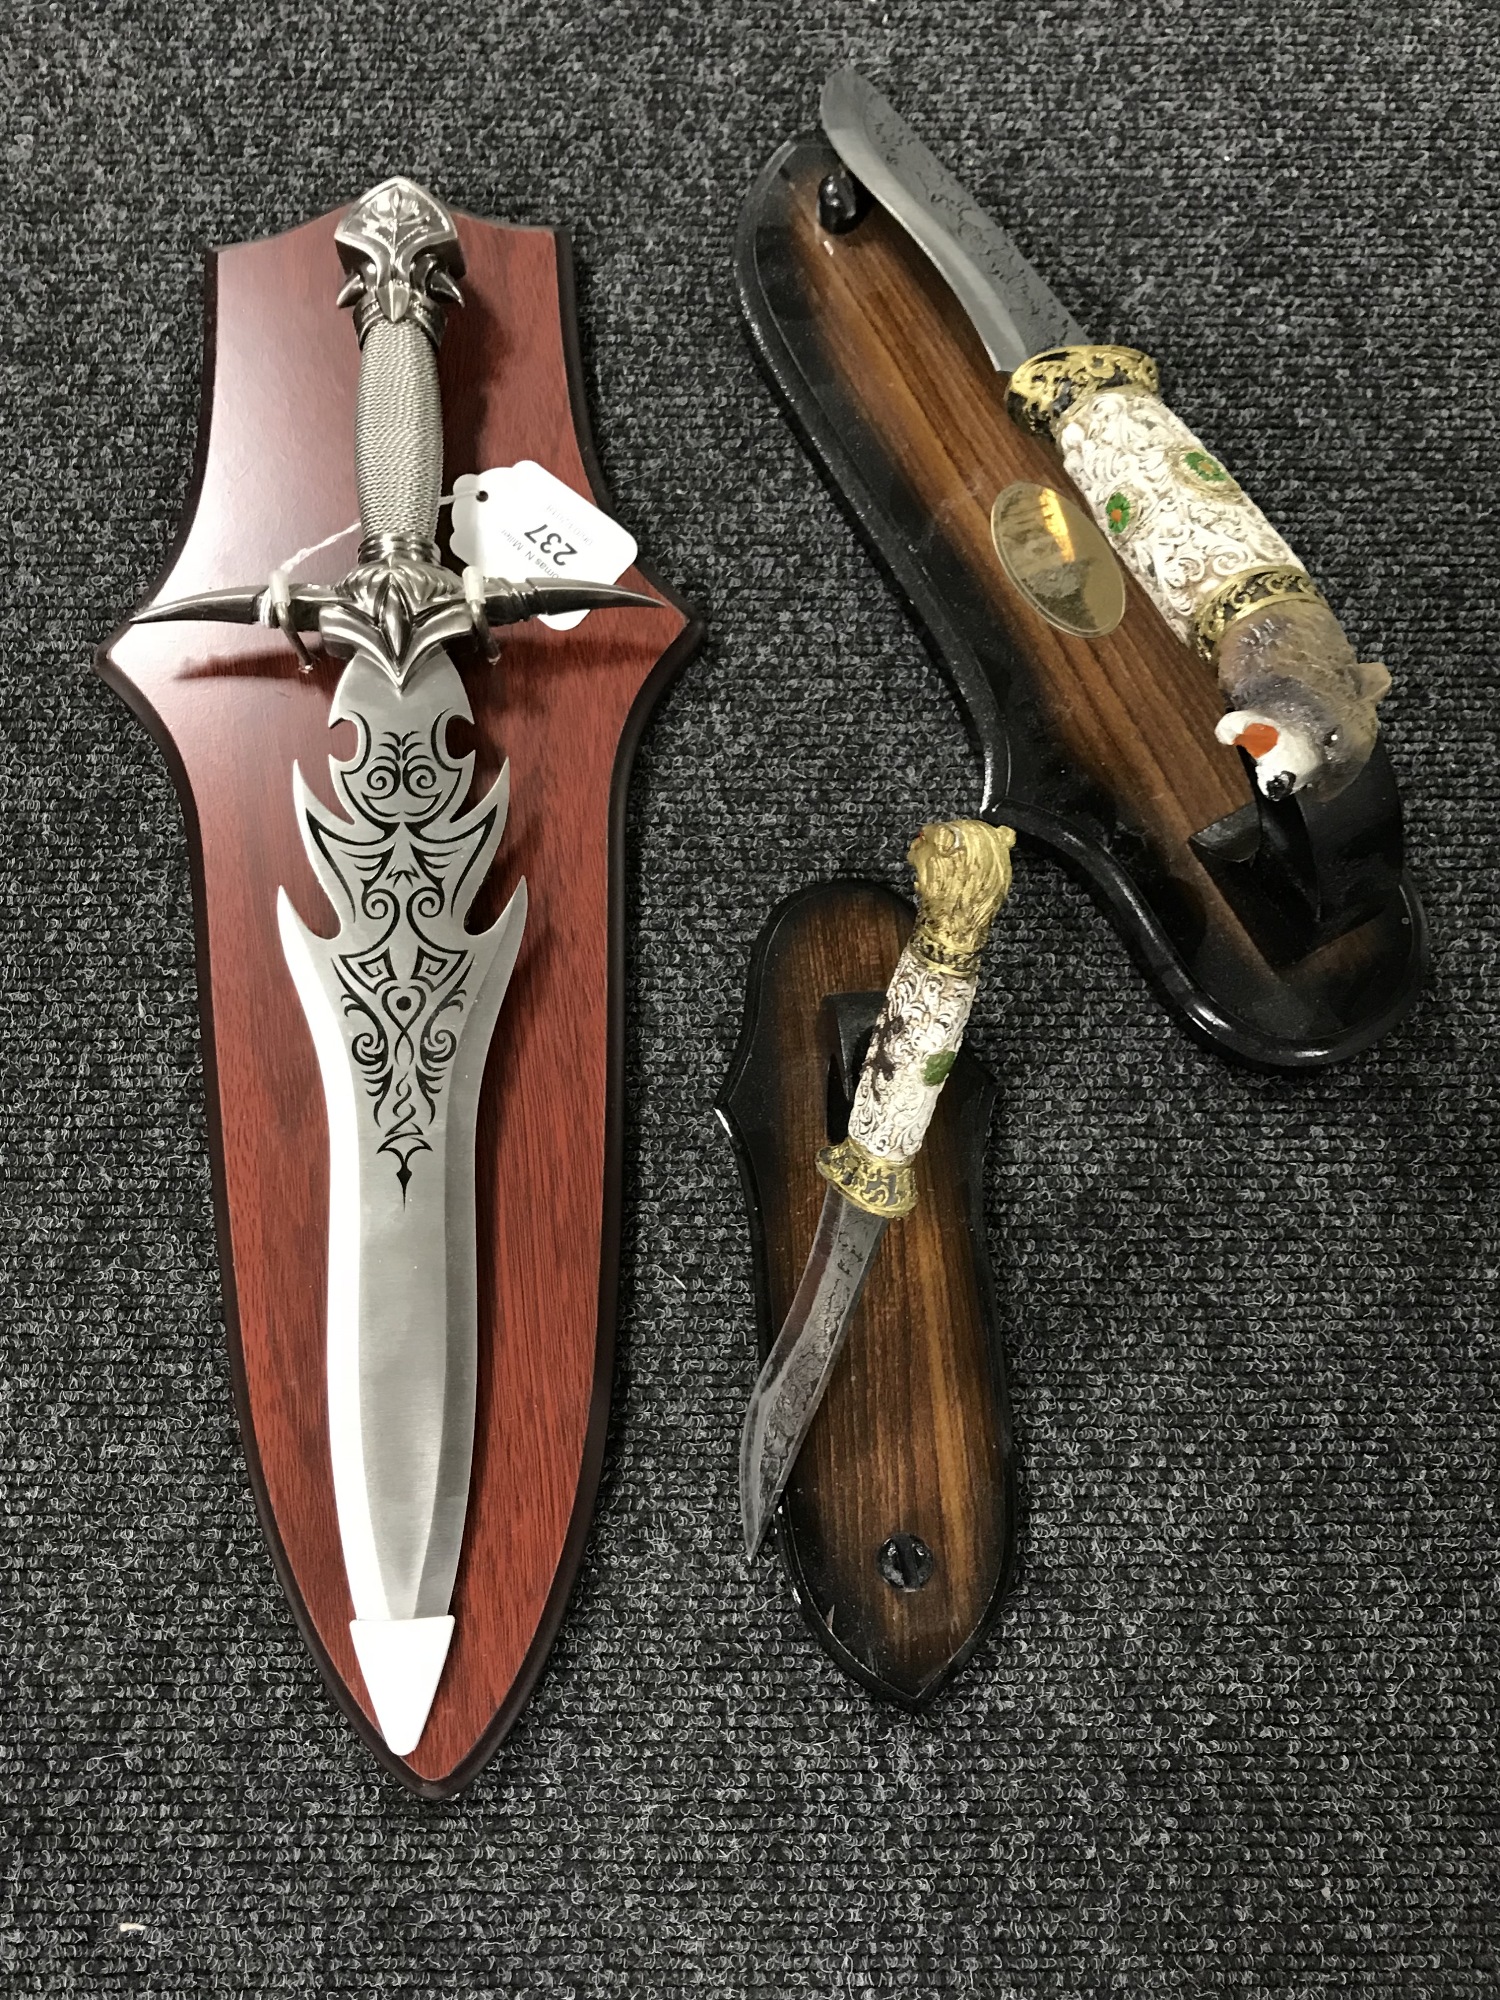 A fantasy knife on wooden shelf together with two hunting knives with animal grips on stands